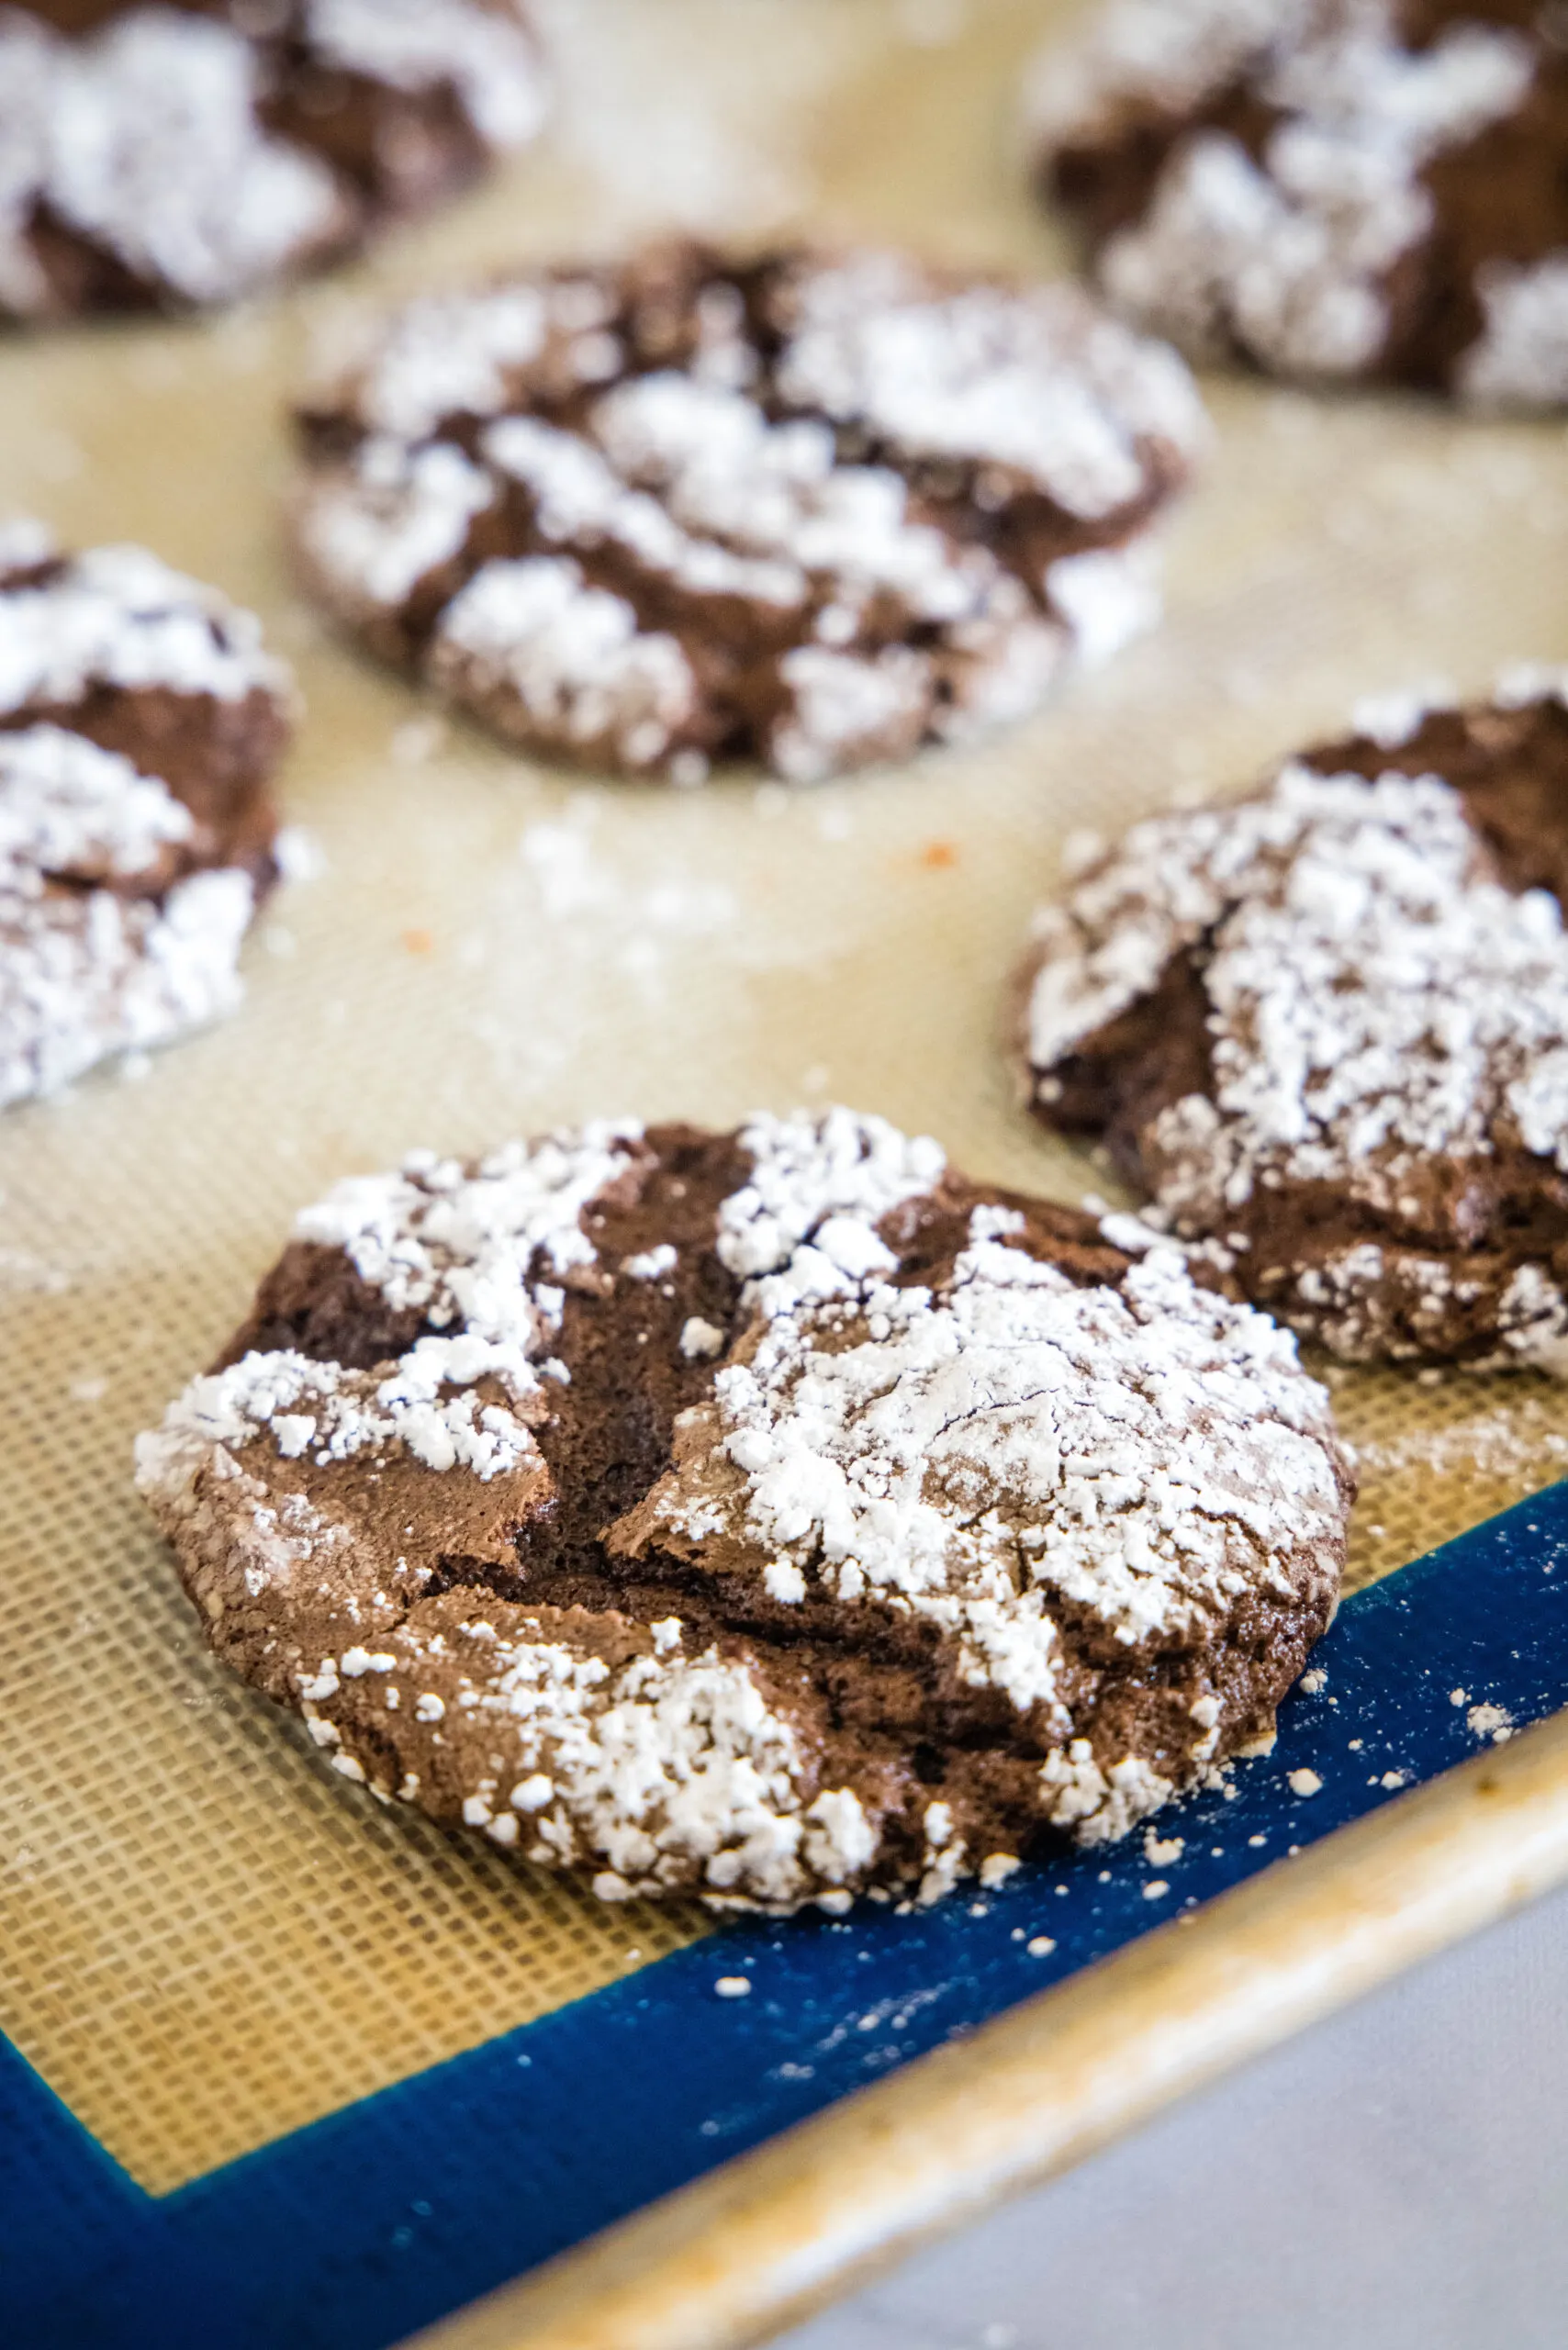 Baked chocolate Cool Whip cookies on a lined baking sheet.